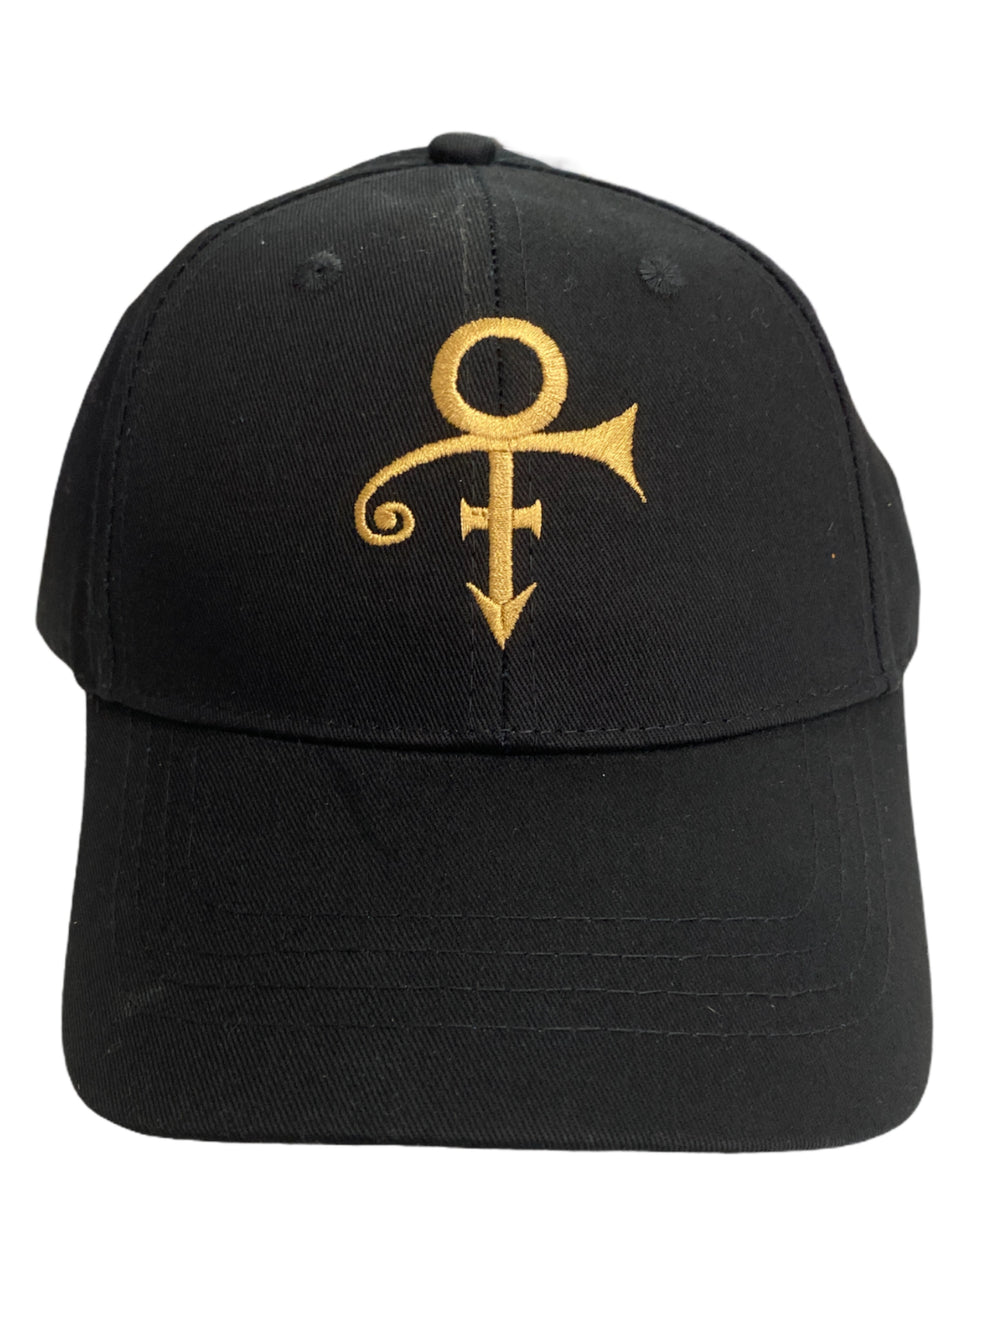 Prince – Love Symbol Purple Rain Name Logo Official Peak Cap Black With GOLD Embroidery